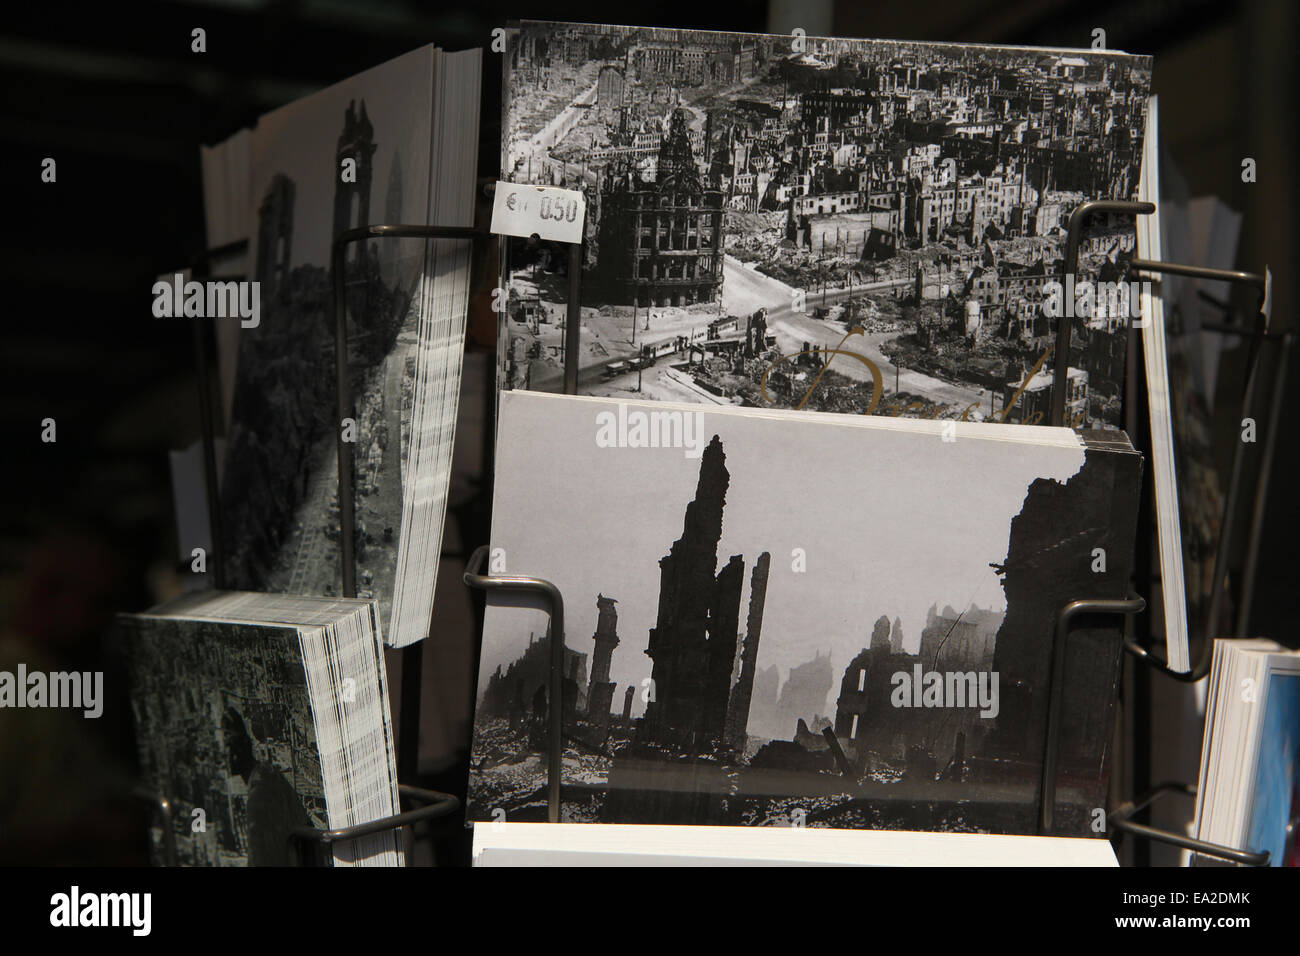 Dresden landmarks after bombing attacks in February 1945. Postcards in a souvenir shop in Dresden, Saxony, Germany. Stock Photo